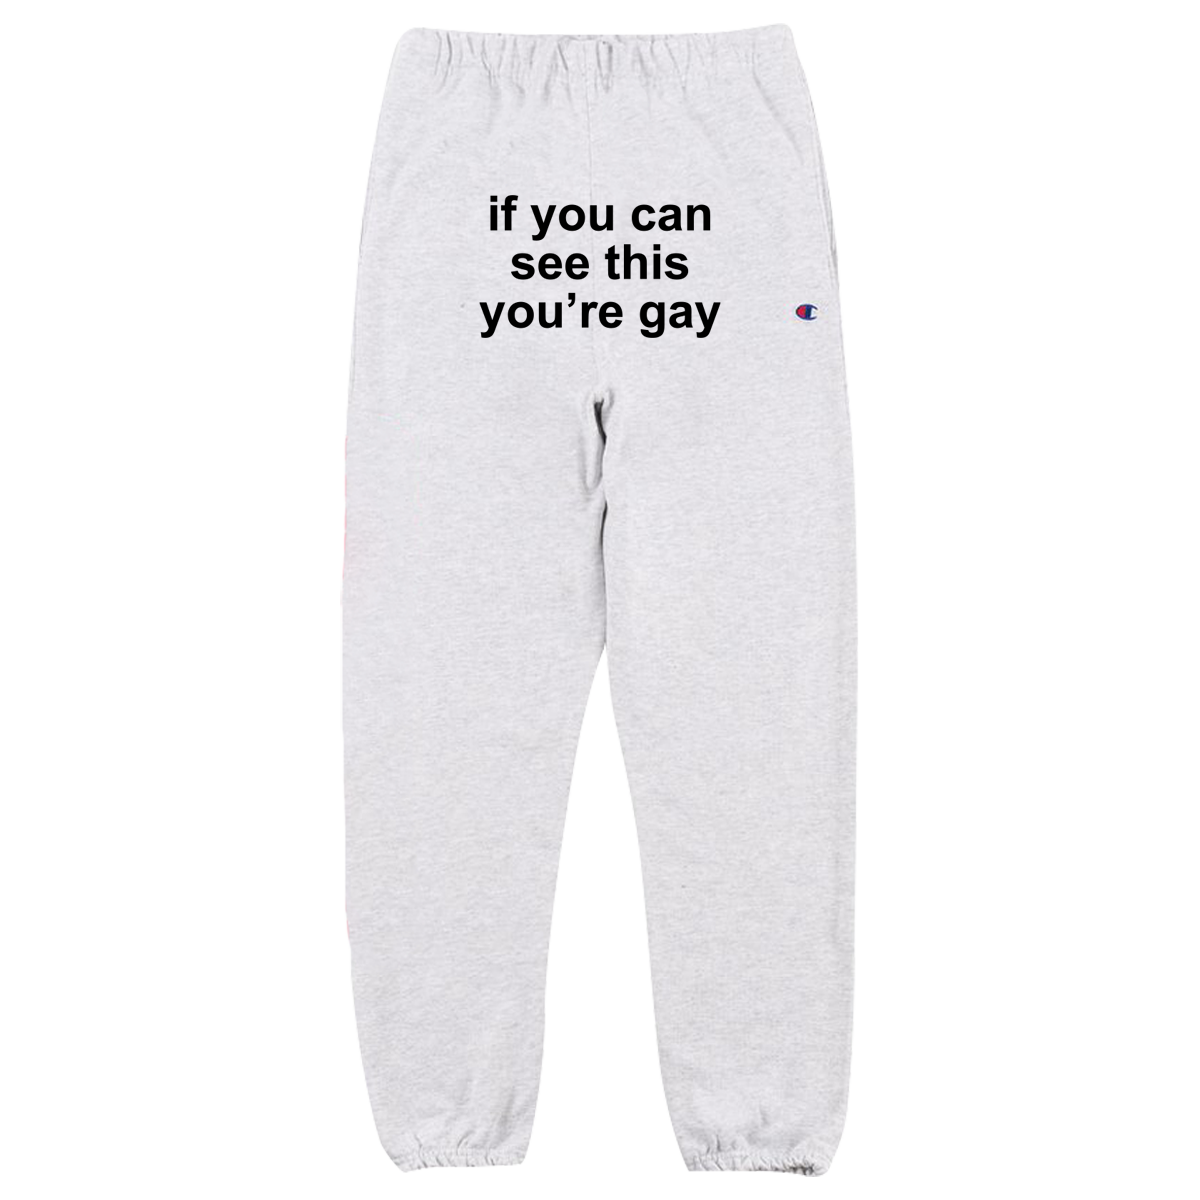 If You Can See This You're Gay Sweatpants (Silver Grey)